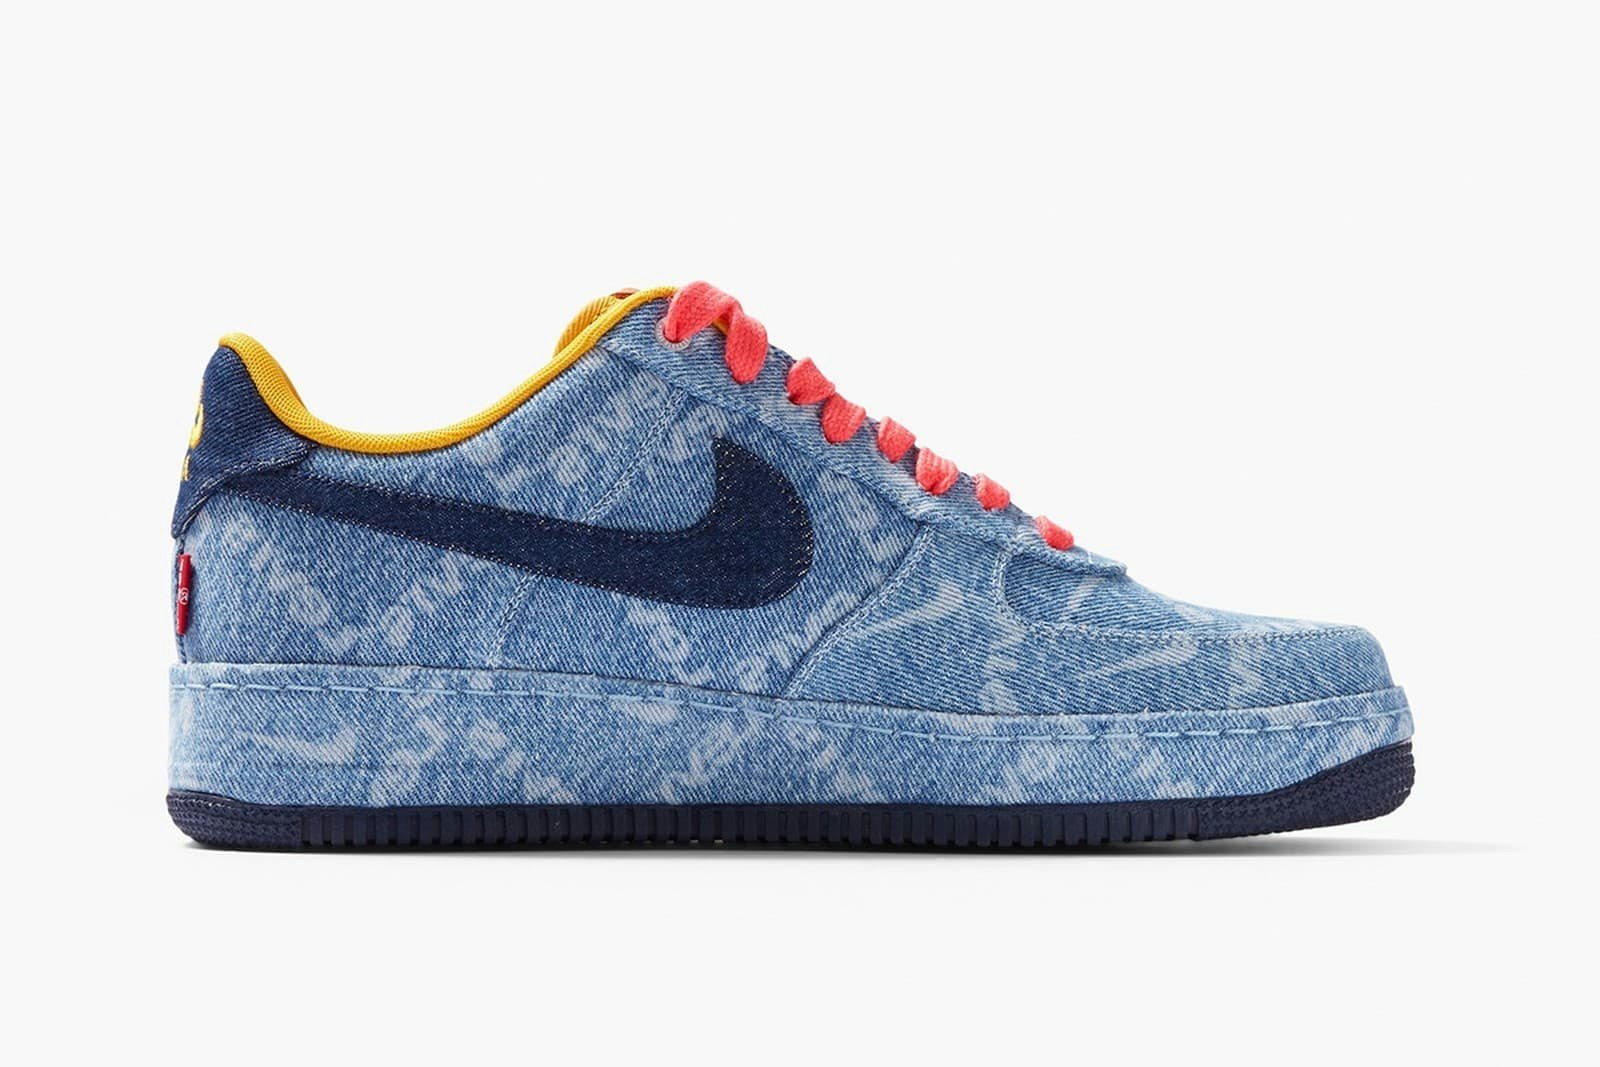 Levi’s x Nike Air Force 1 Low "Exclusive Denim"